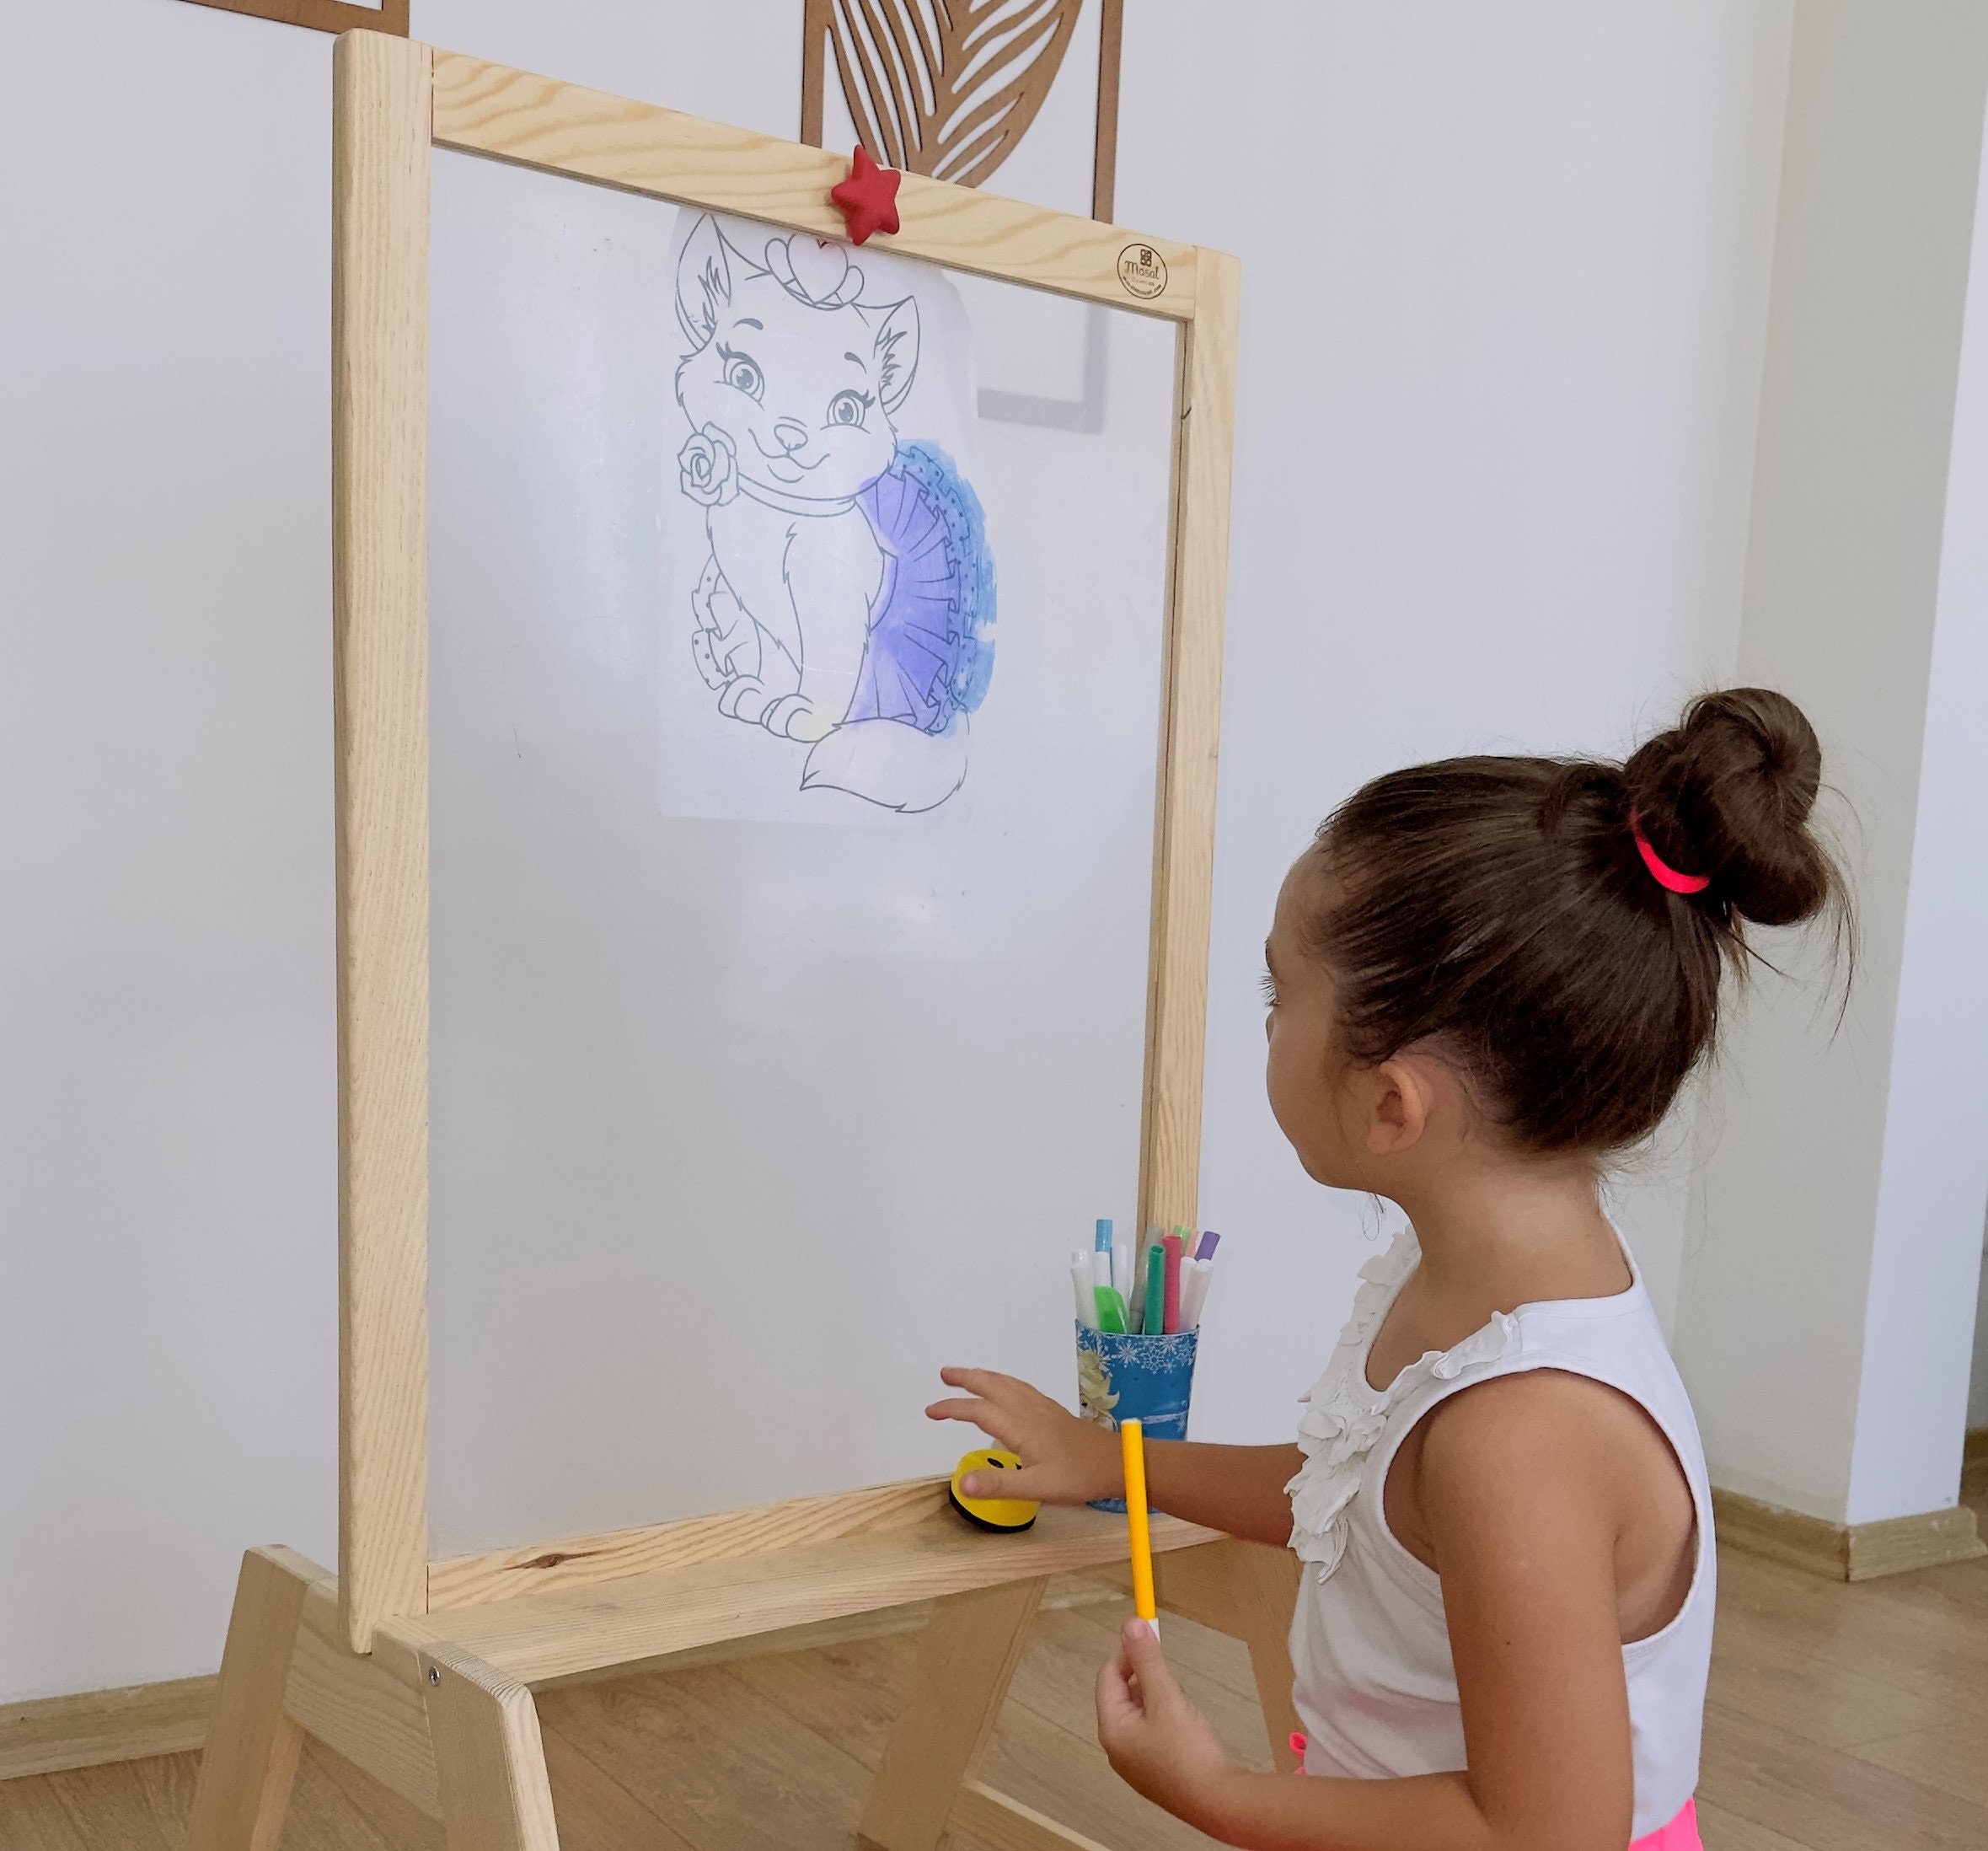 Buy EALING BABY 3-in-1 Art Easel for Kids With Dry-erase Board